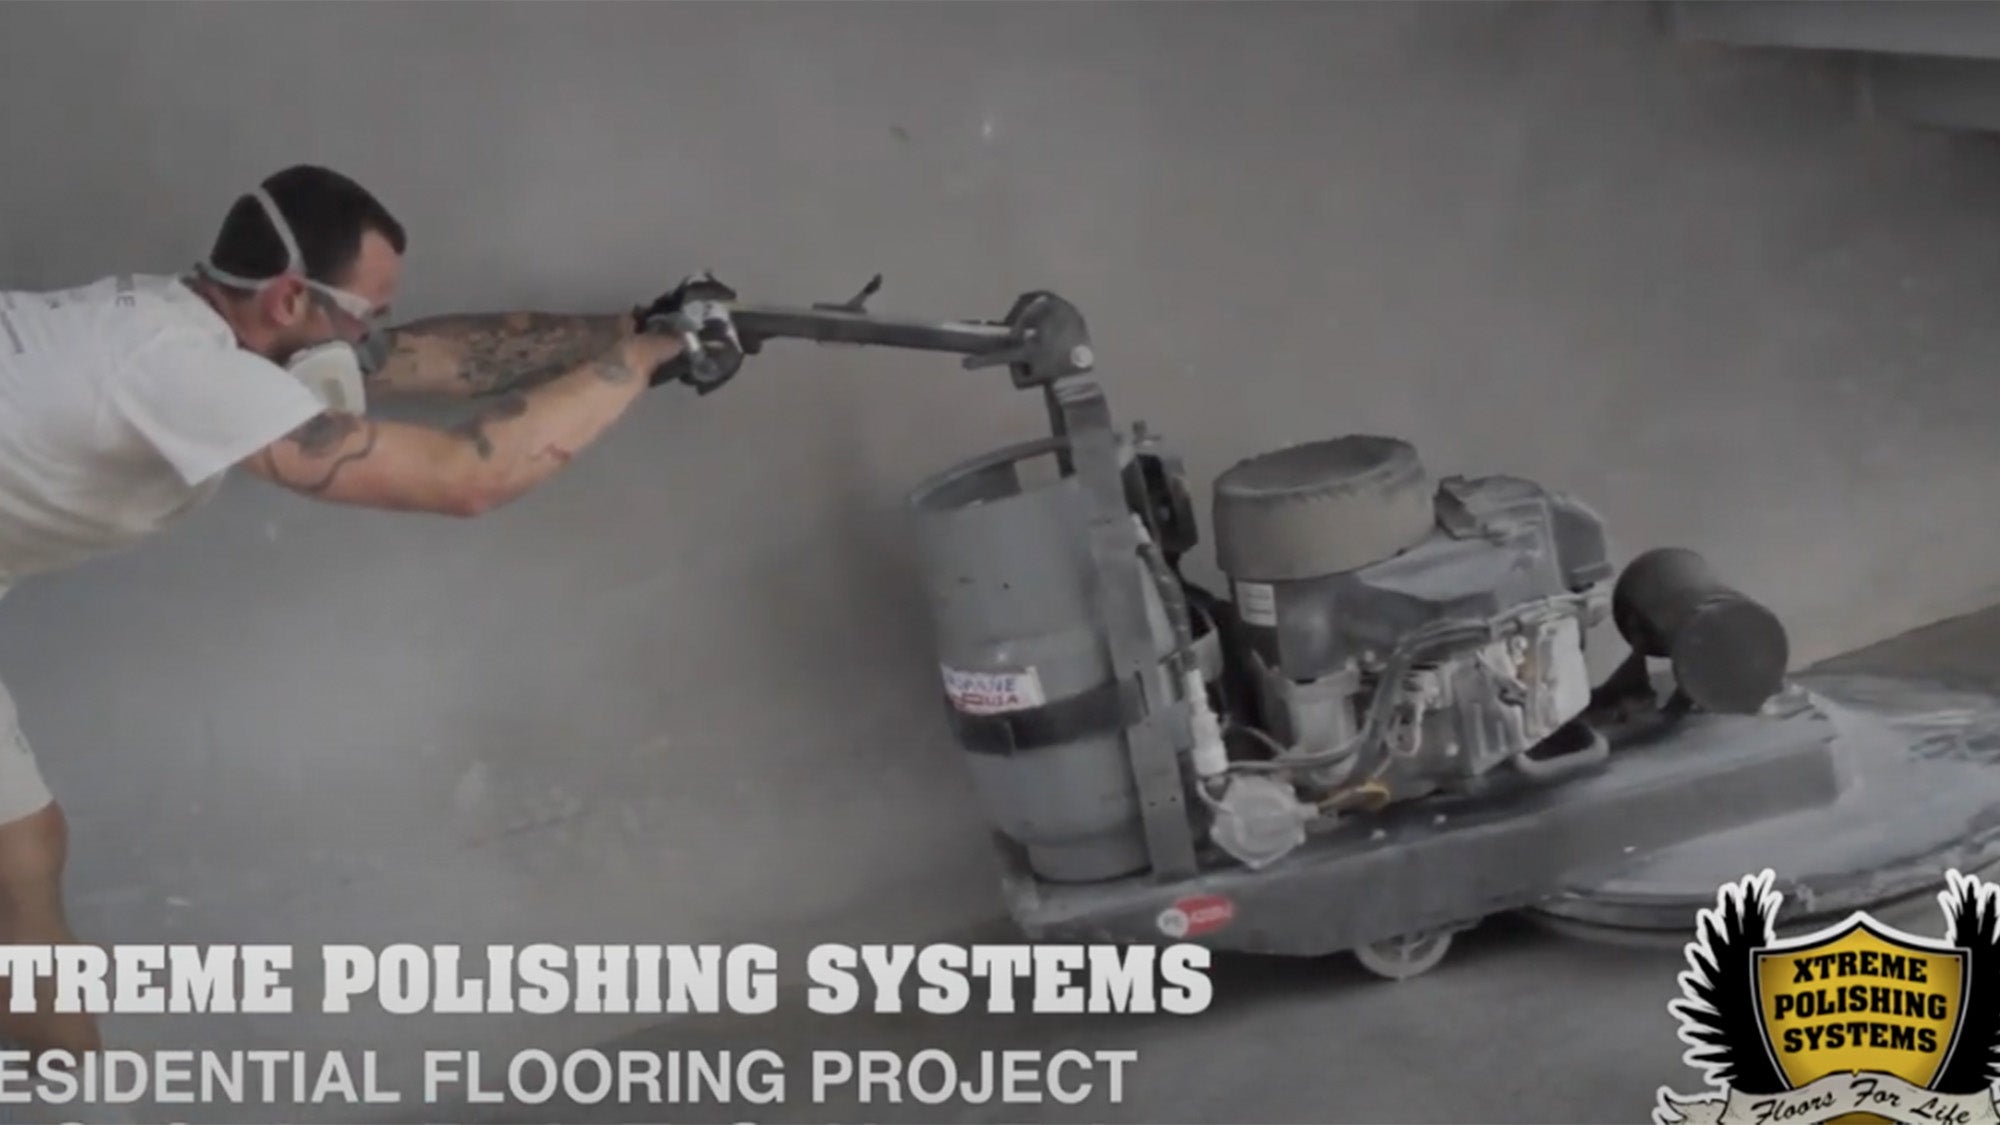 XPS Video - how to polish a residential concrete floor step by step